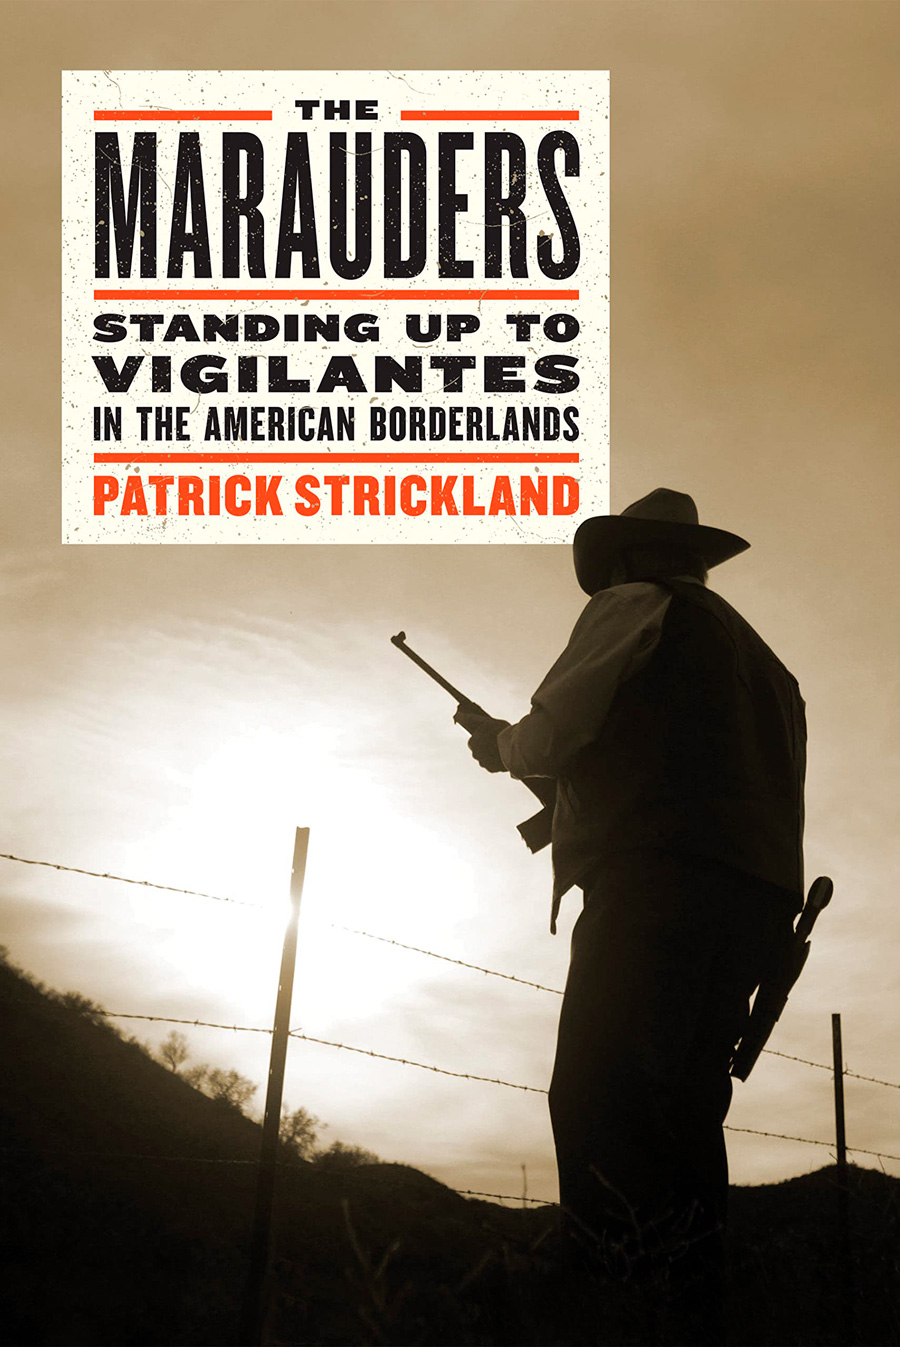 The Marauders: Standing Up to Vigilantes in the American Borderlands